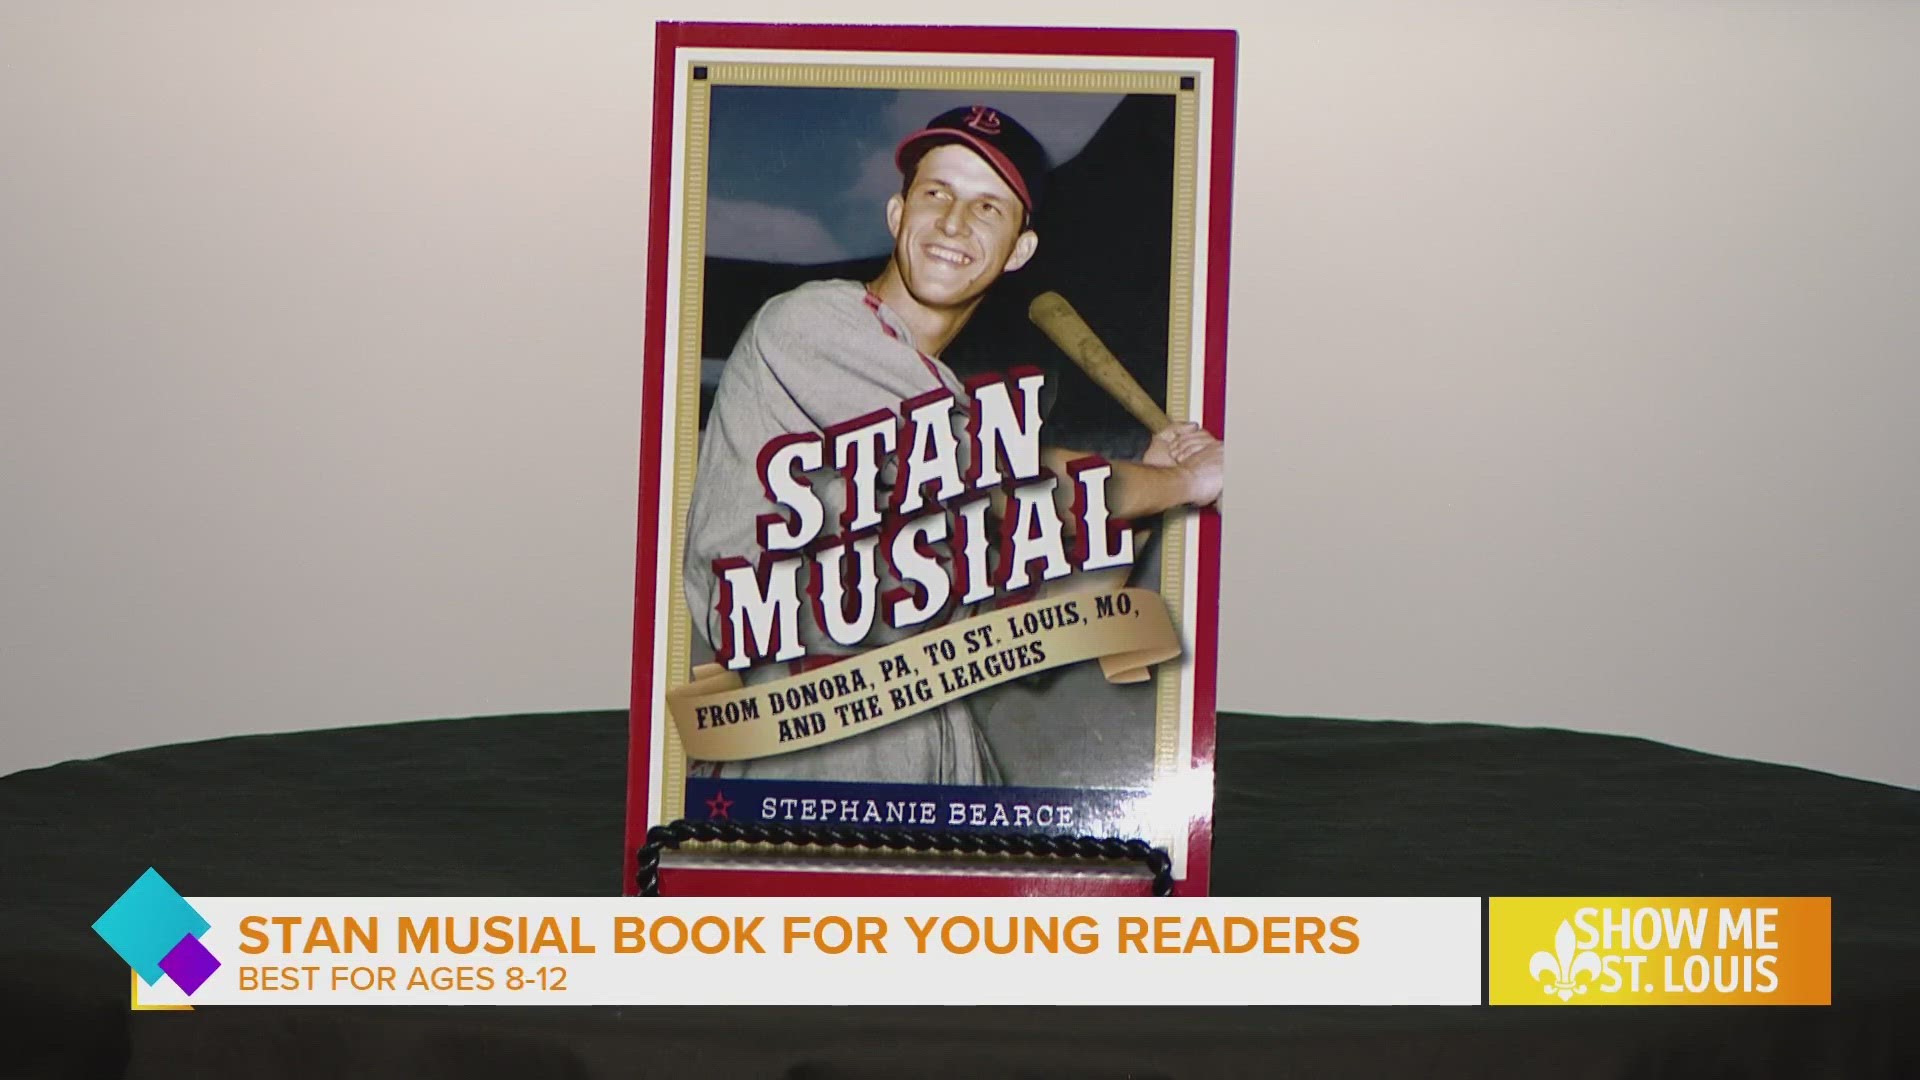 See how one STL author is sharing the story of Stan the Man with younger generations